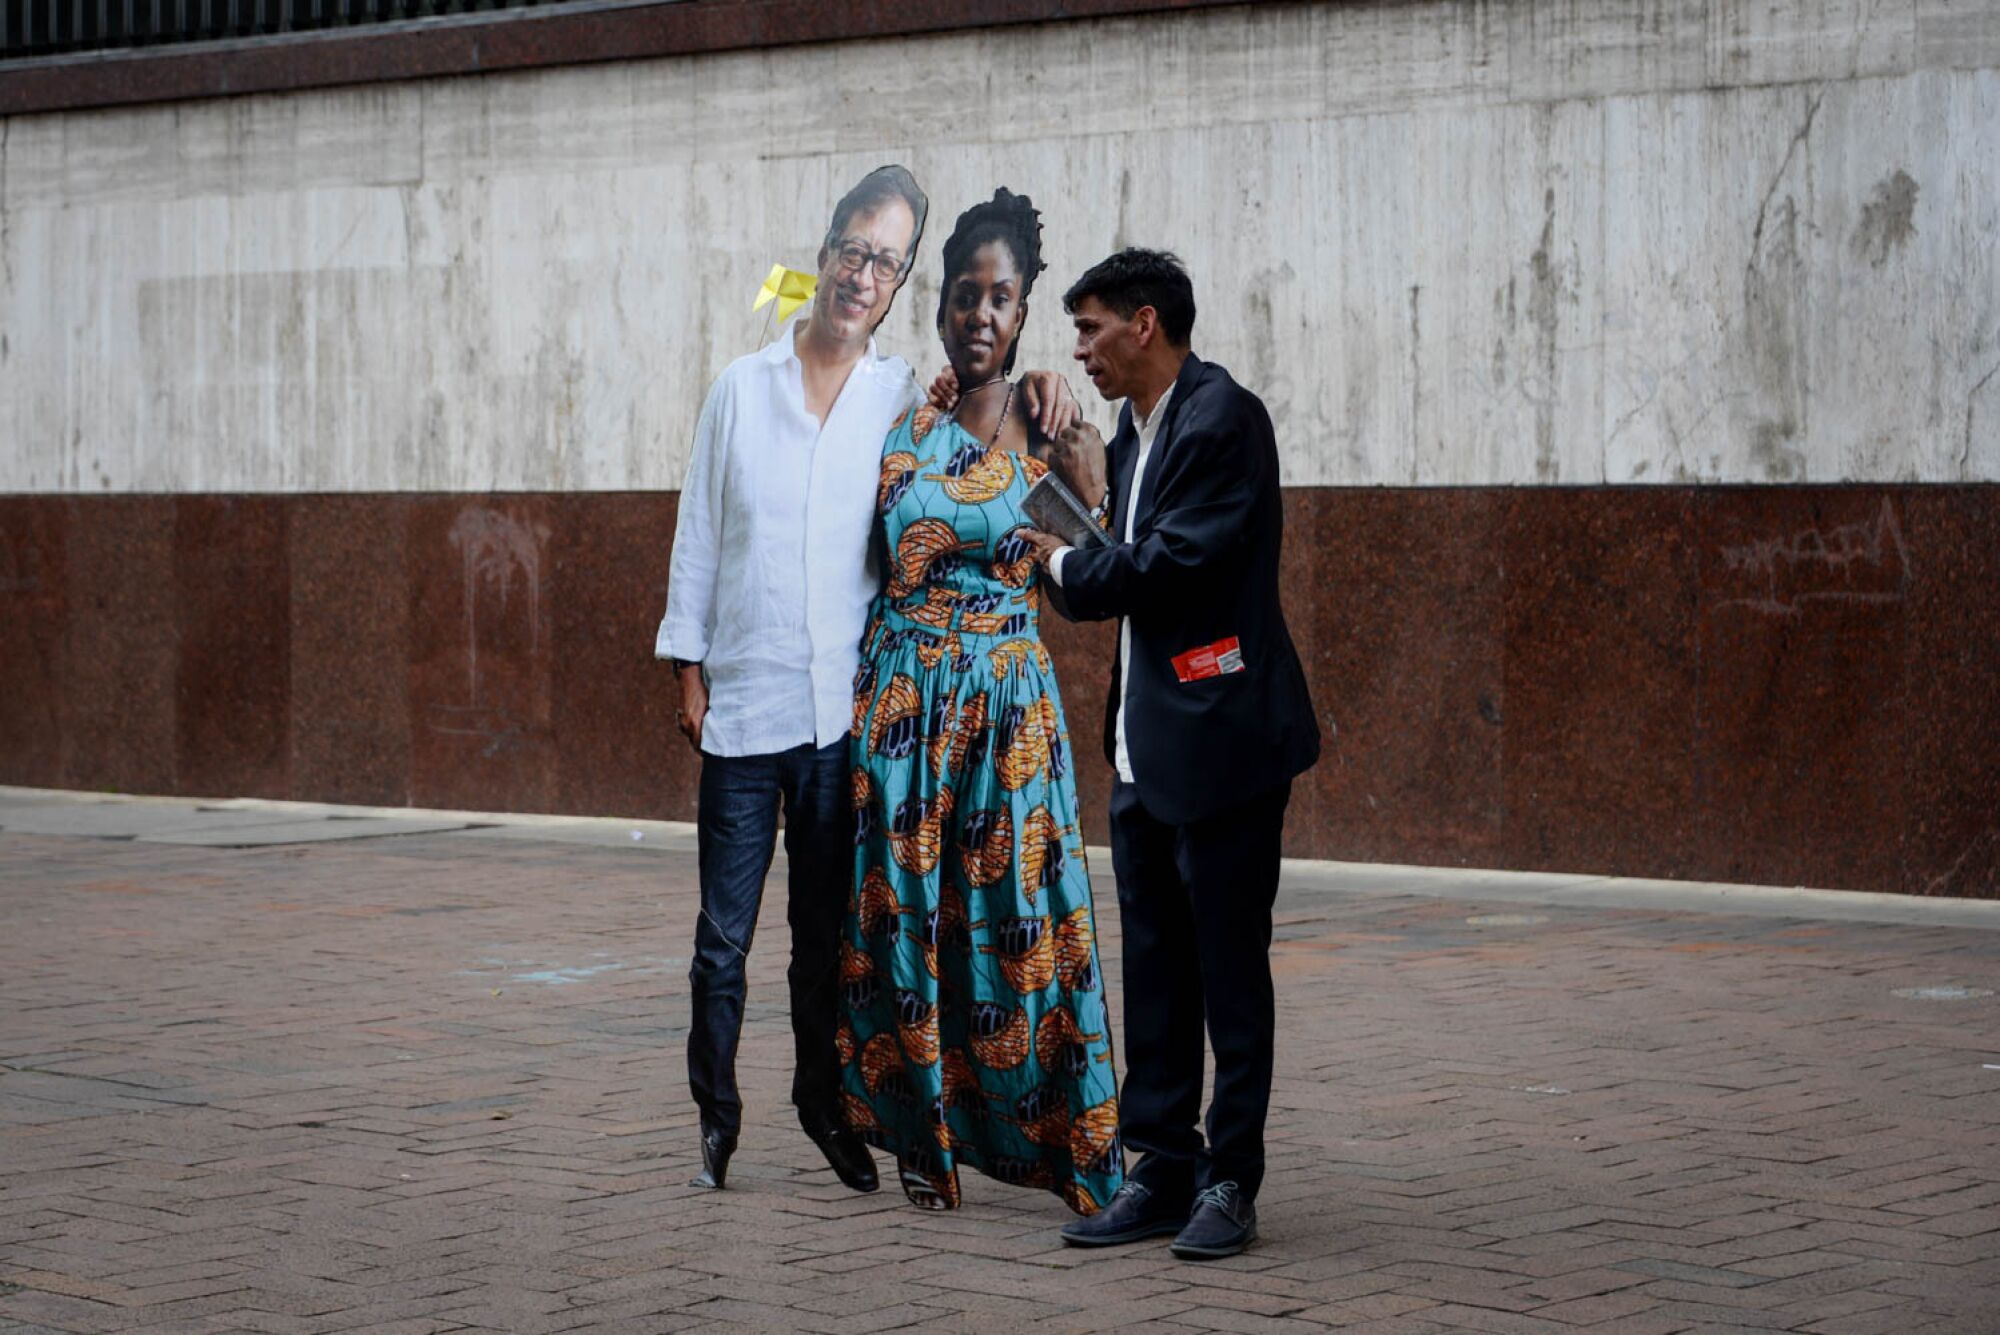 A man holds a cardboard cutout of Colombia's president and vice president